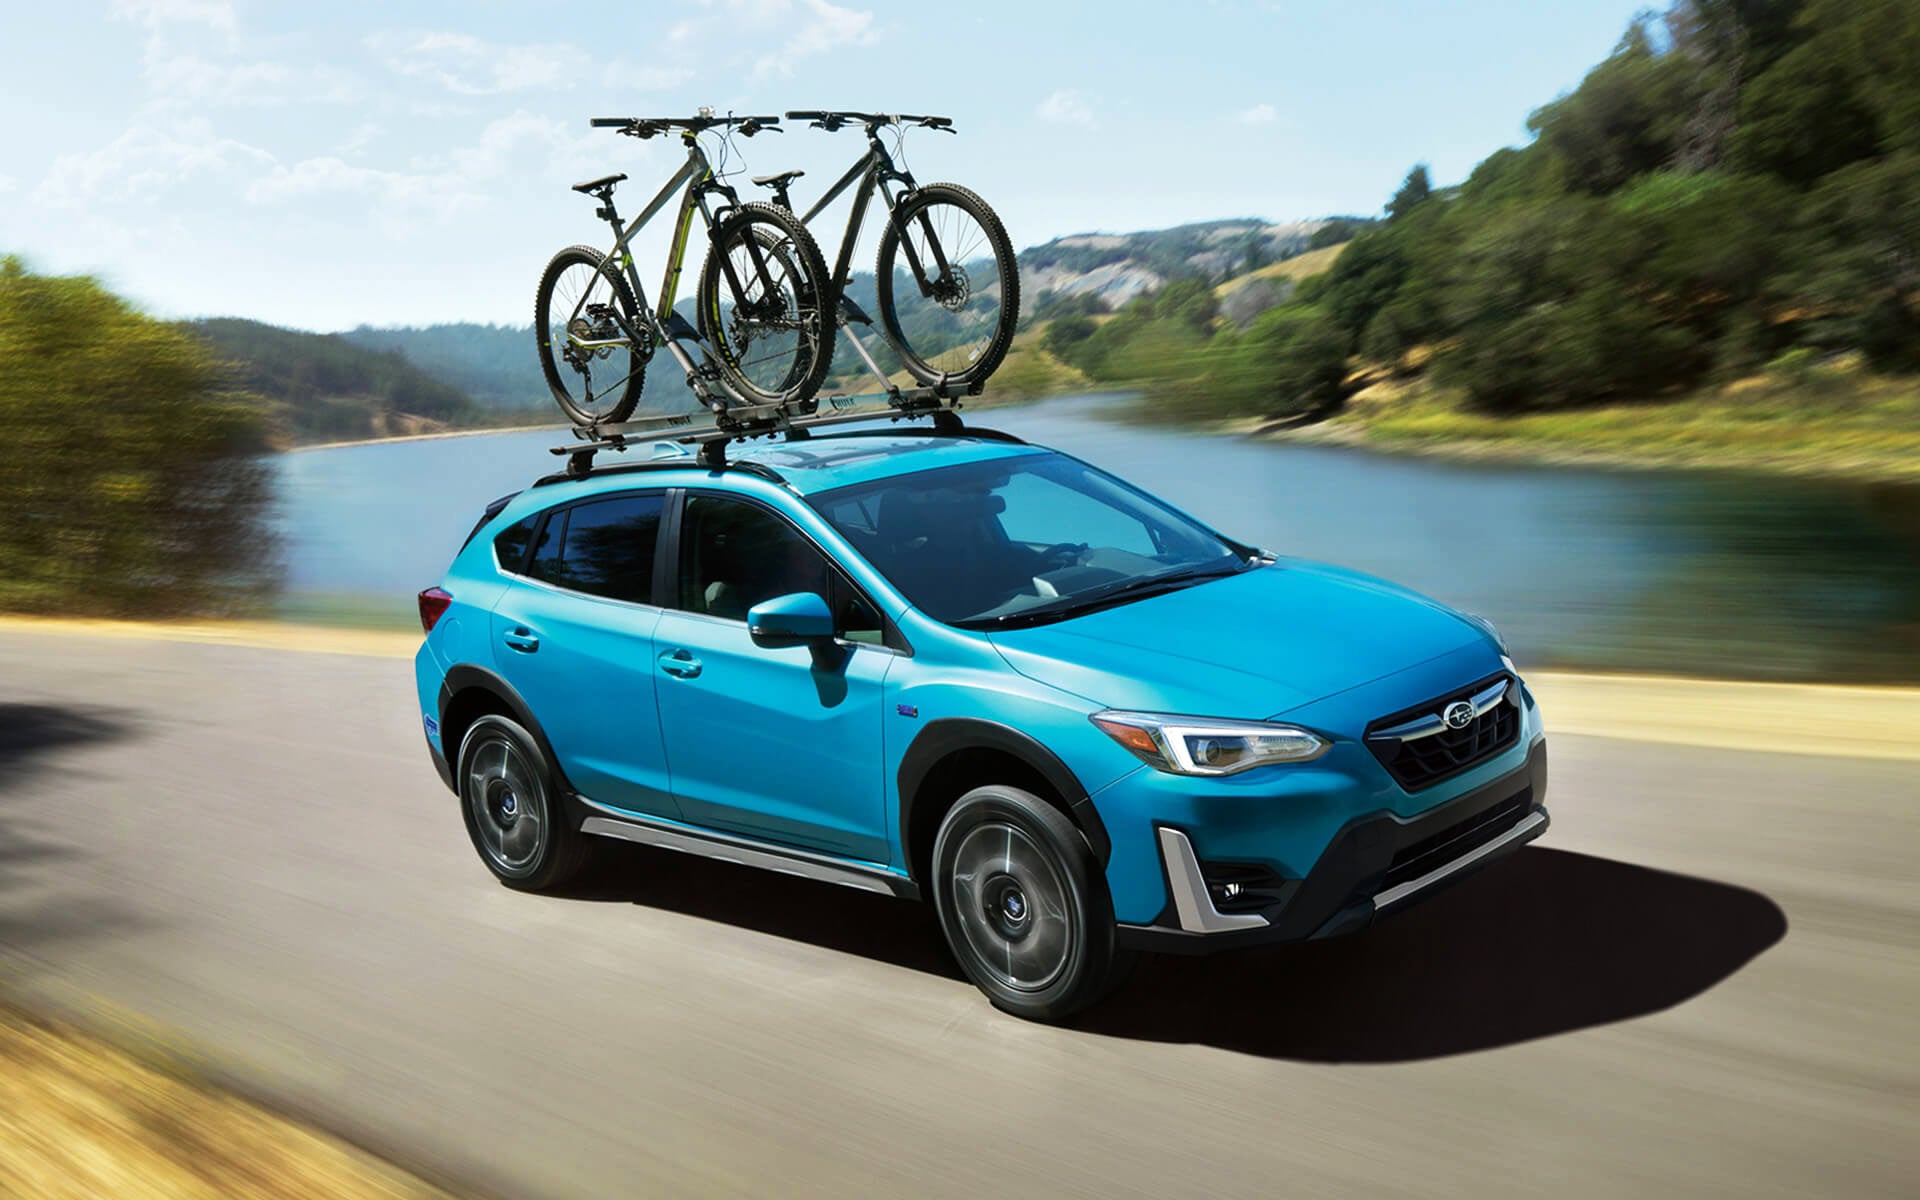 A blue Crosstrek Hybrid with two bicycles on its roof rack driving beside a river | Bergstrom Subaru Green Bay in Green Bay WI